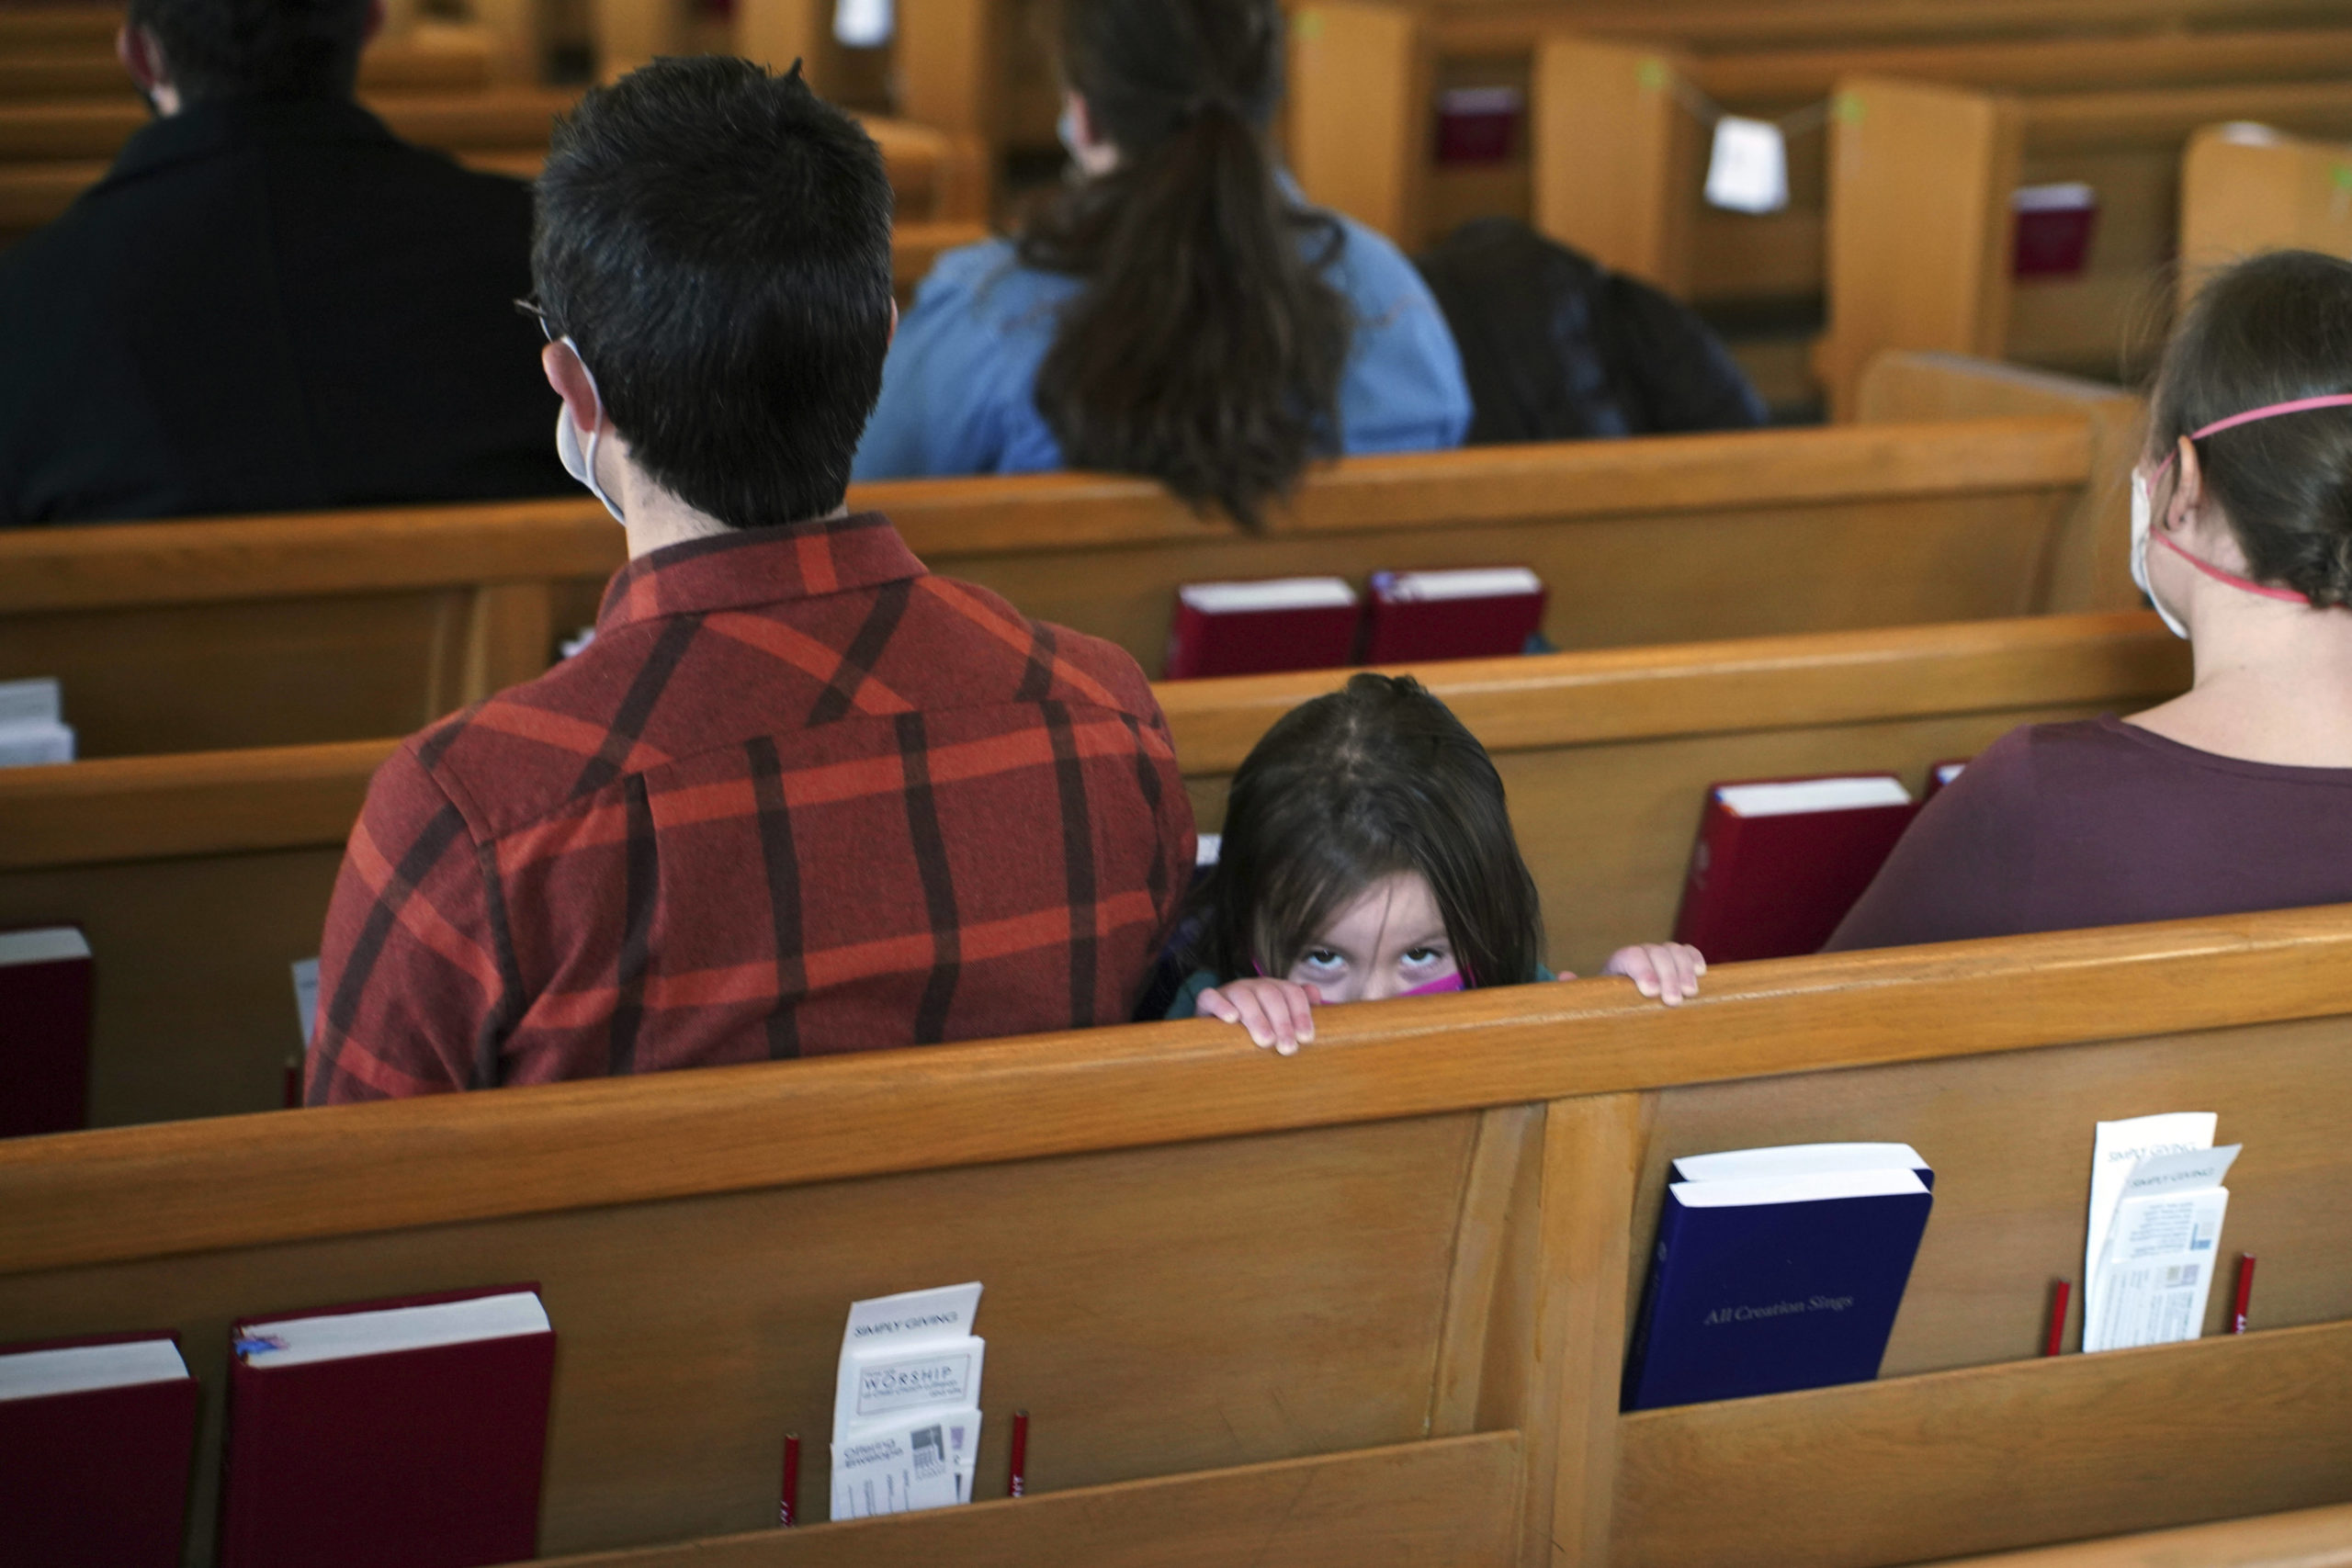 A young girl peeks above the pew next to her parents during services at Christ Church Lutheran, Jan. 23, 2022, in Minneapolis. (Jim Mone / AP)